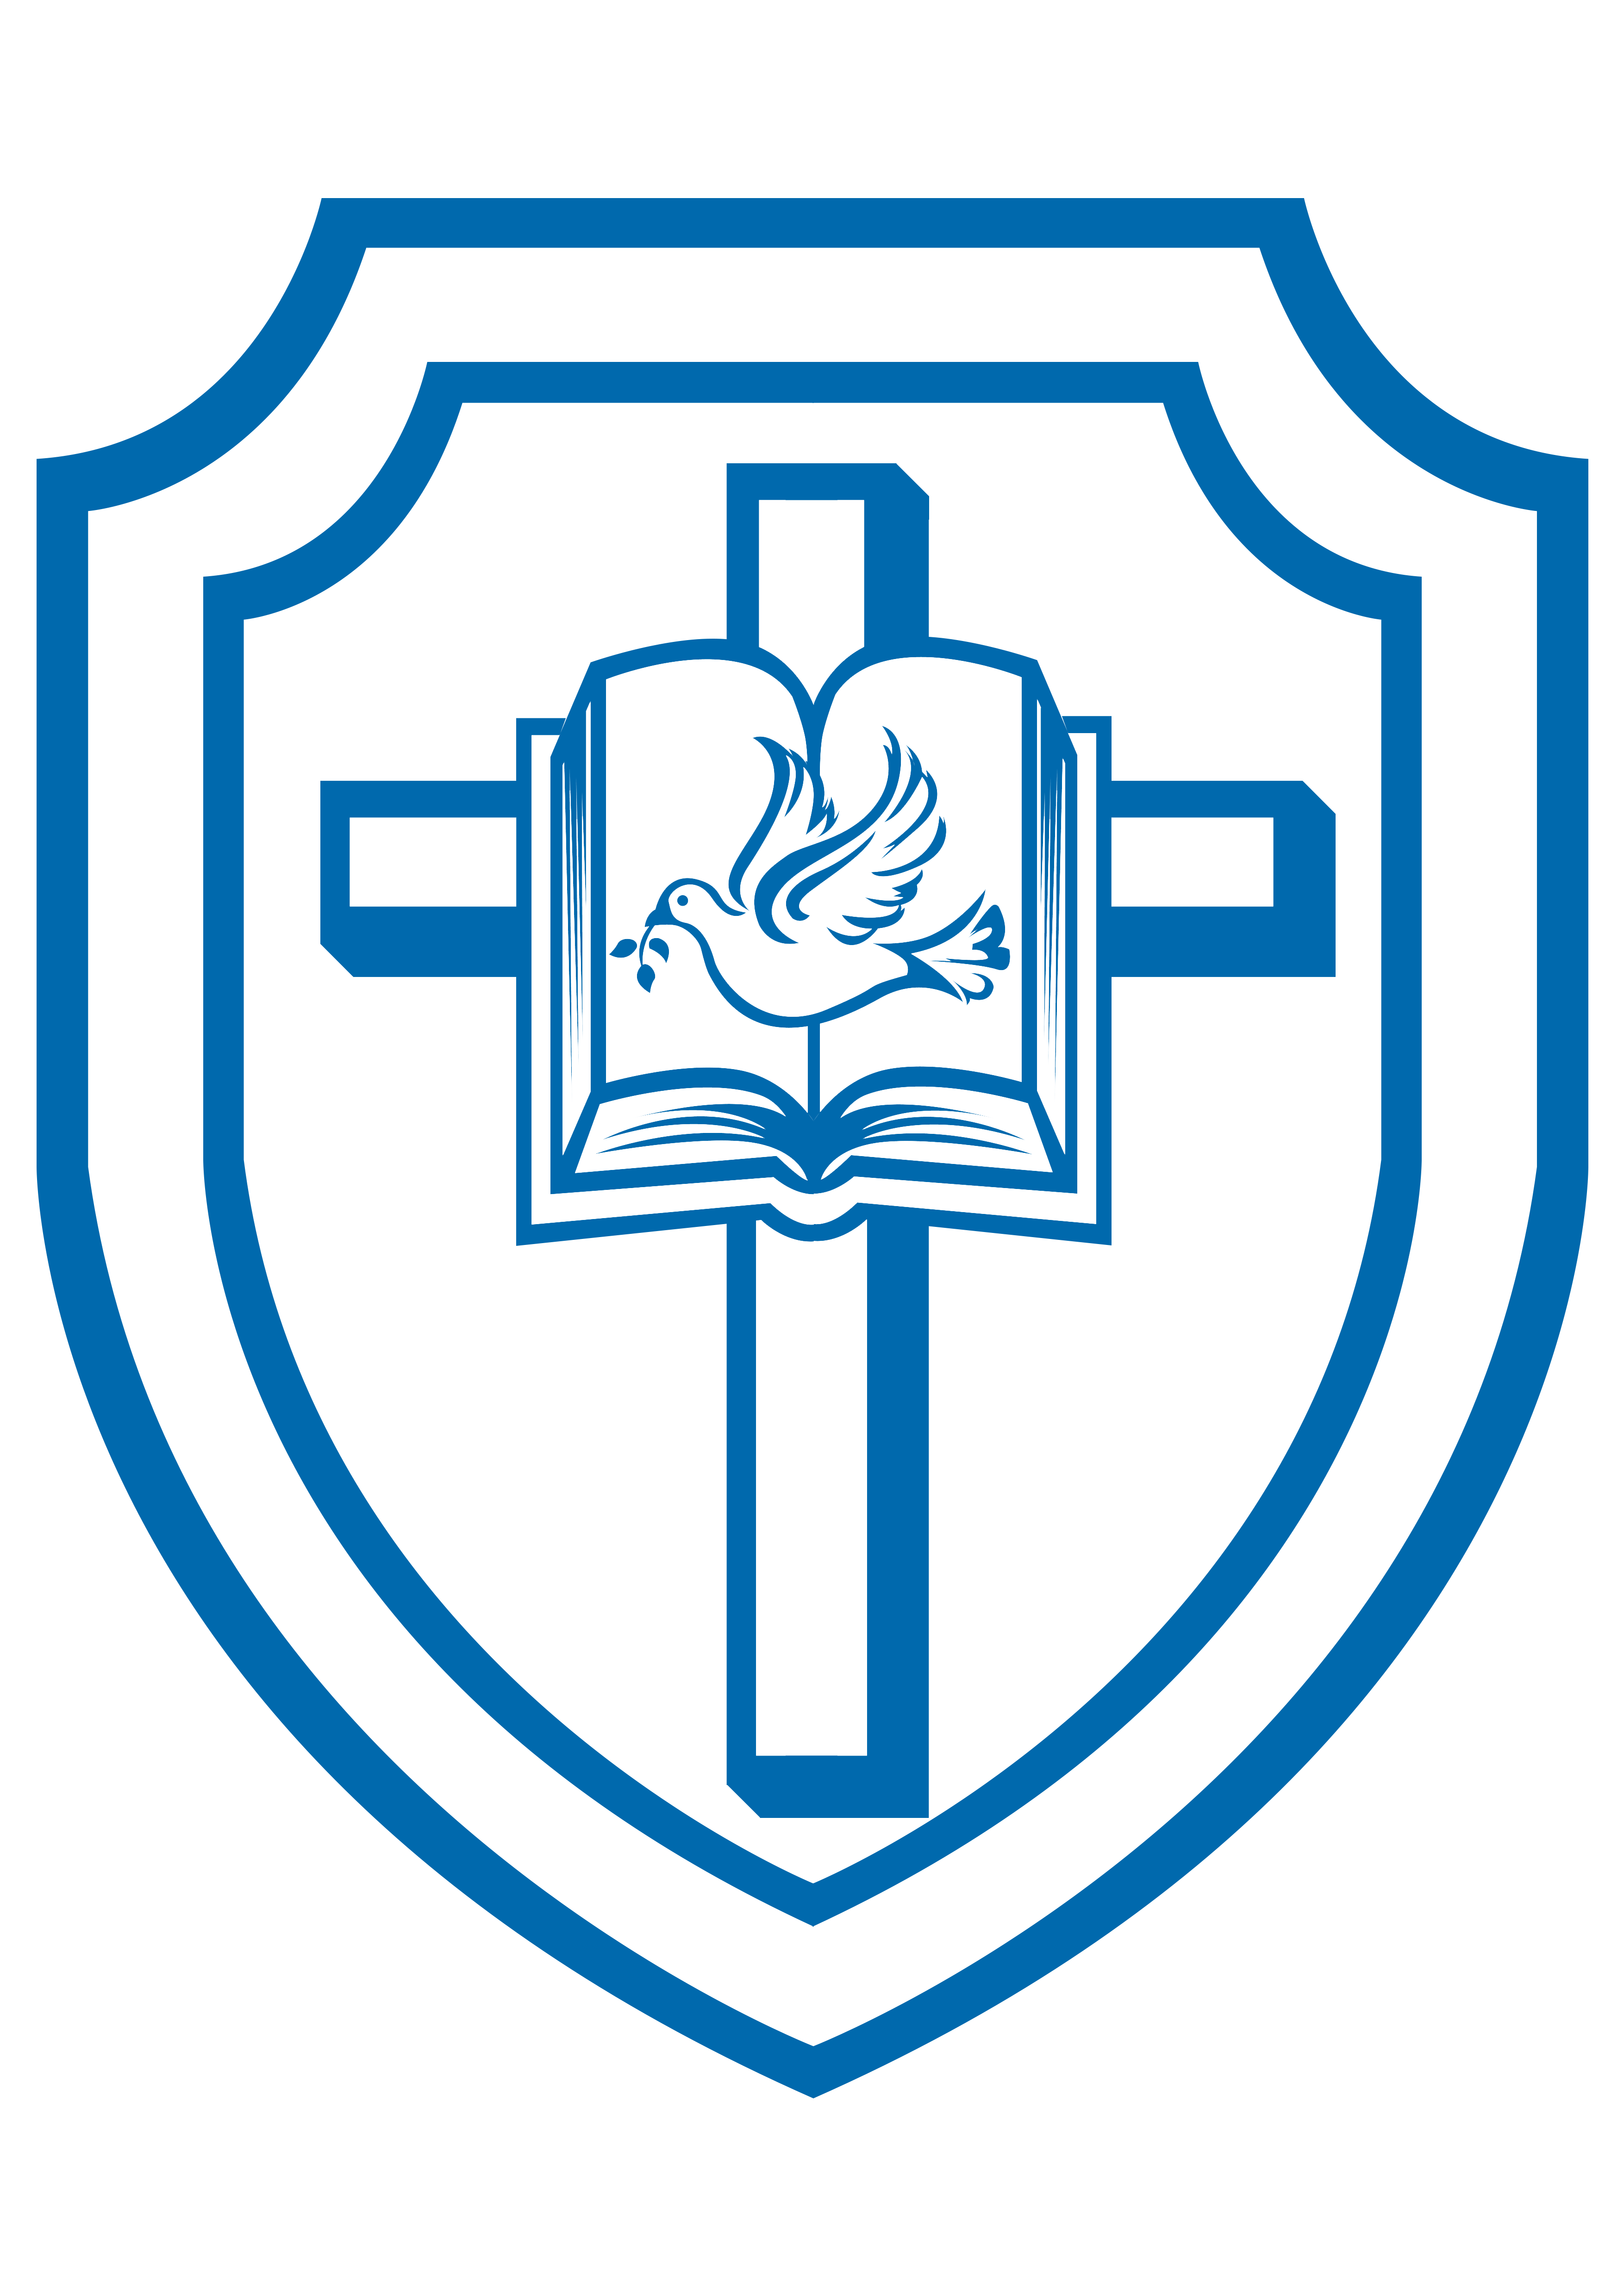 Crest_Only_Blue.png